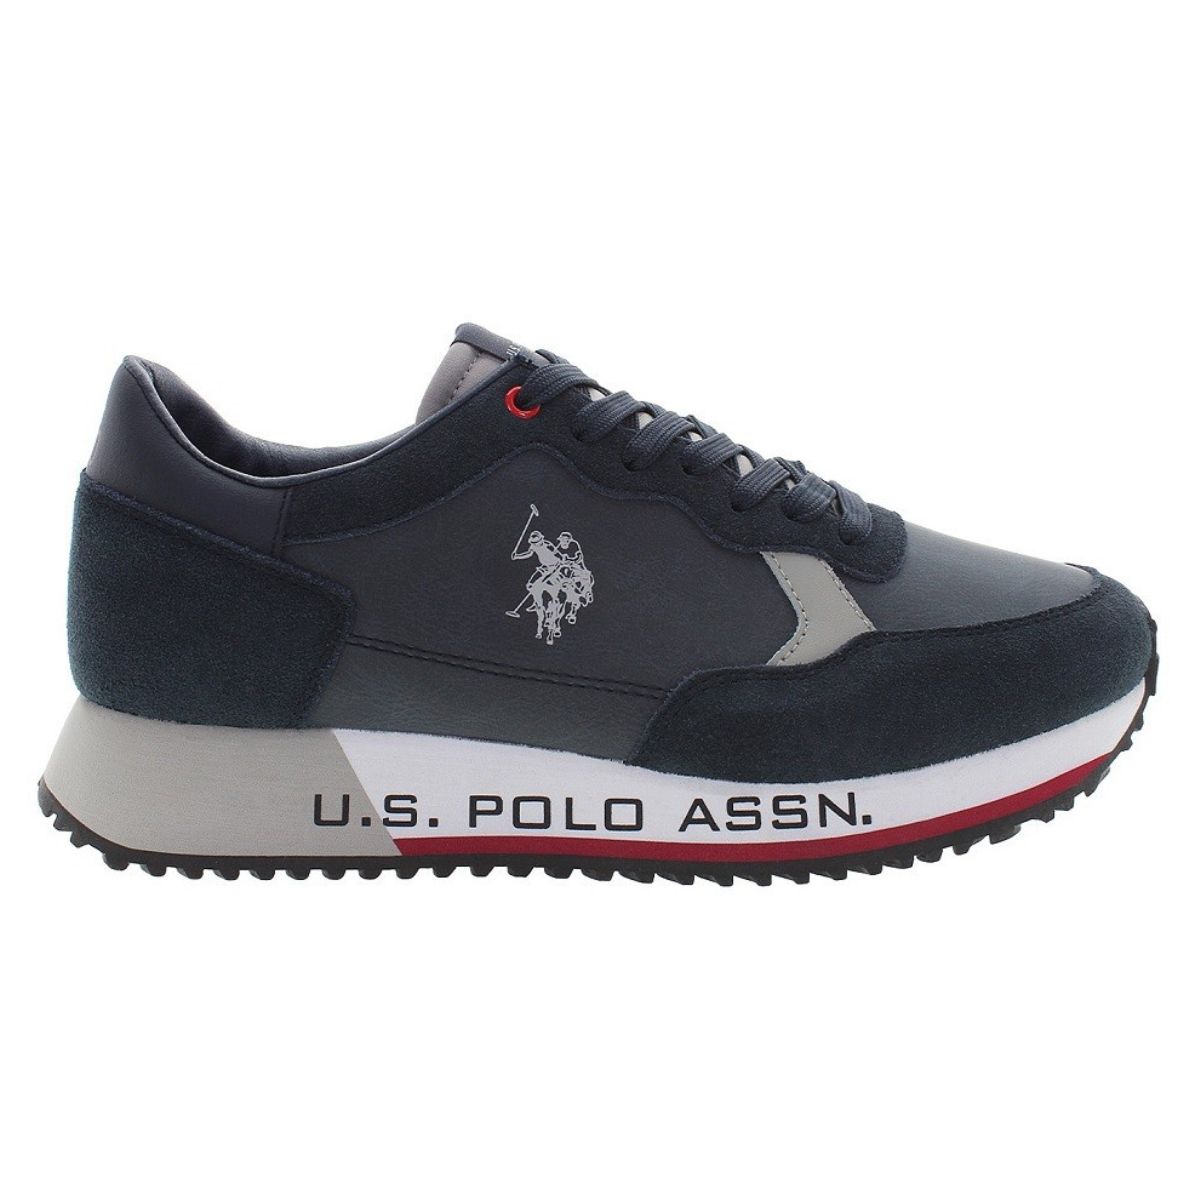 U.S.POLO ASSN, Ανδρικά Sneakers, Suede Sneakers, Sneakers με Κορδόνια, Sneakers Μαύρα, CLEEF005-DBL